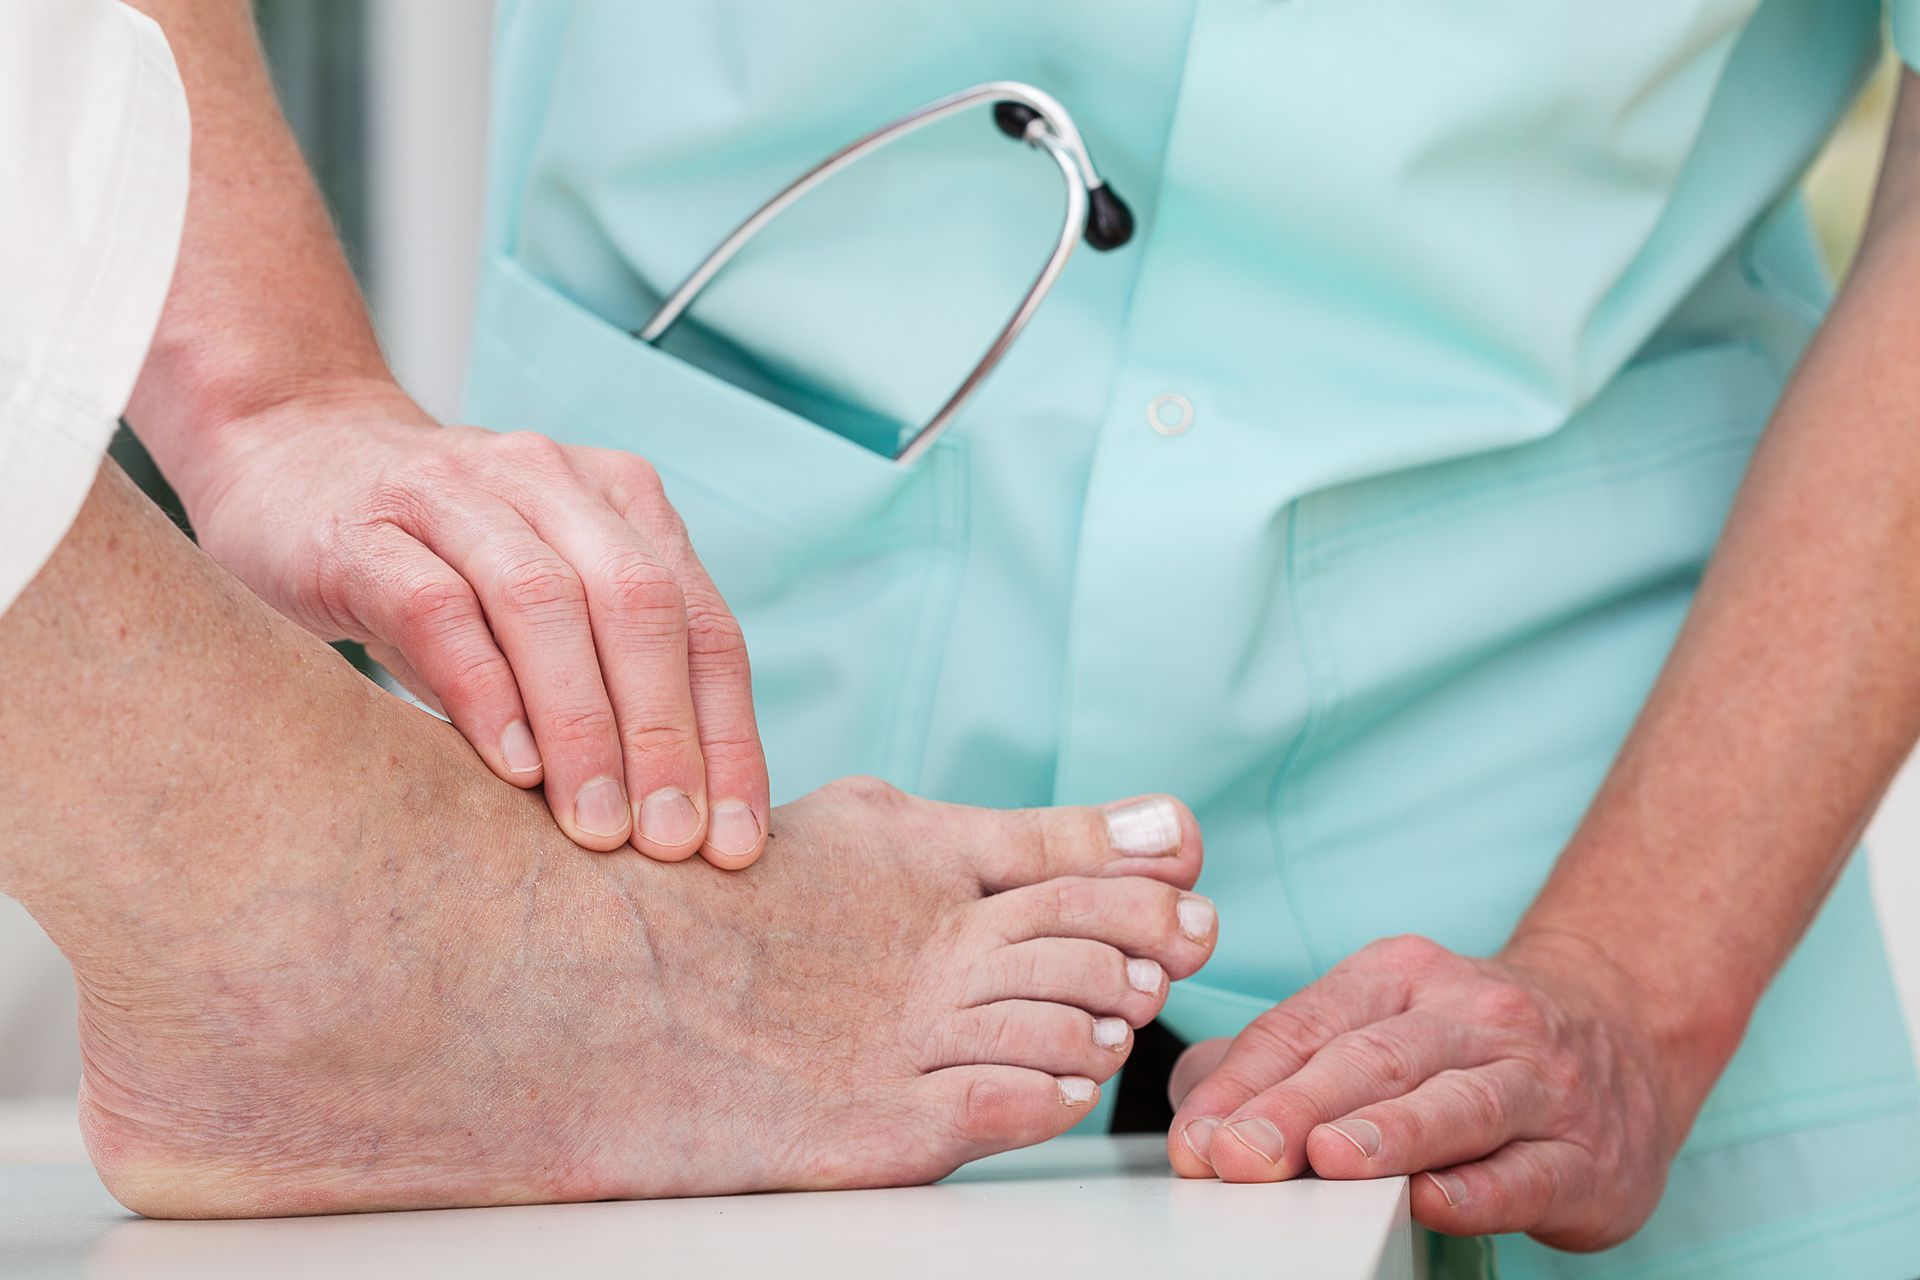 Is Lapiplasty Better Than Traditional Bunion Surgery?